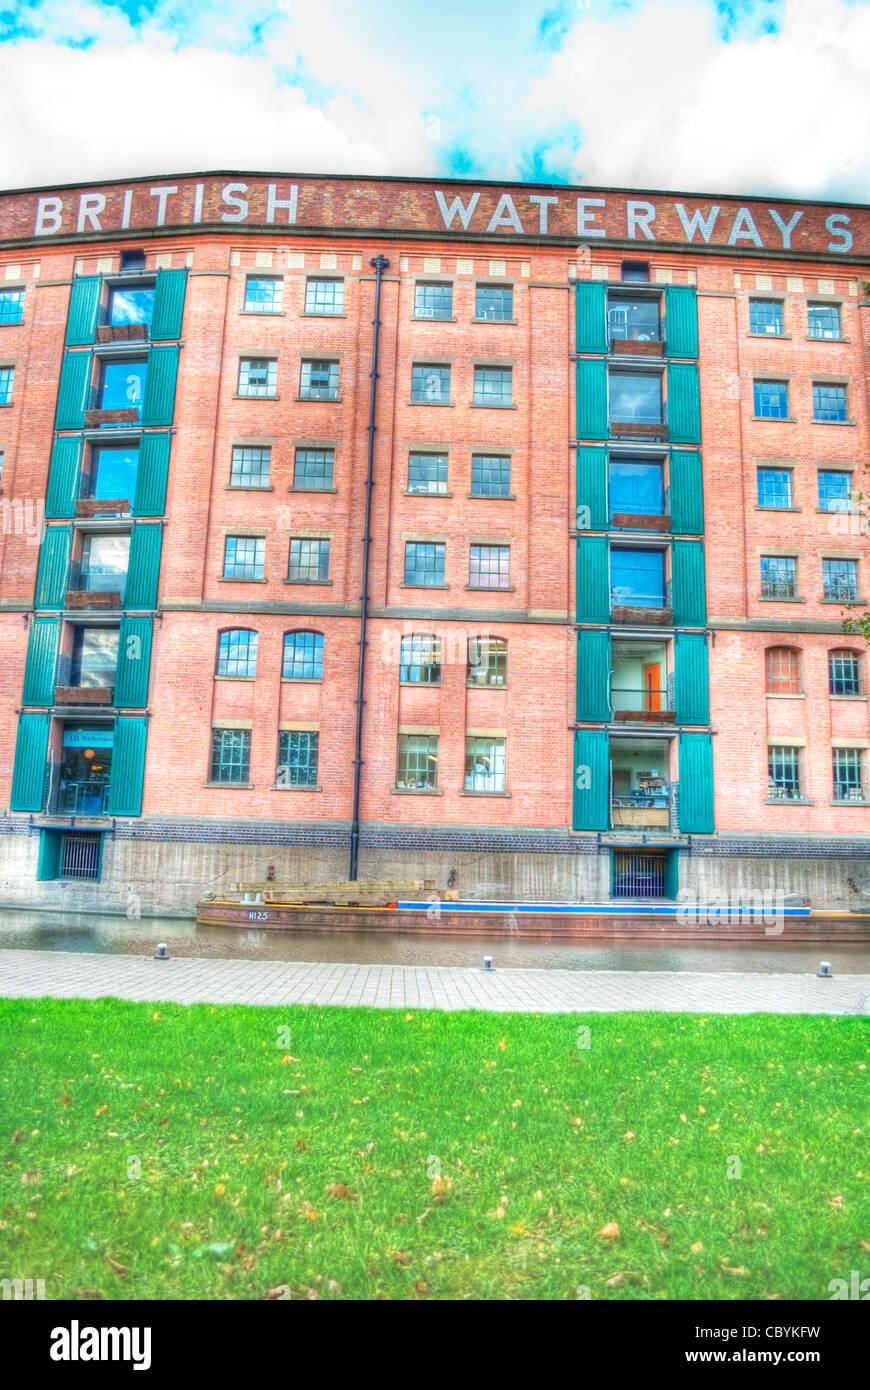 British Waterways, Nottingham. HDR photo of this old location that is so vibrant and detailed. Stock Photo